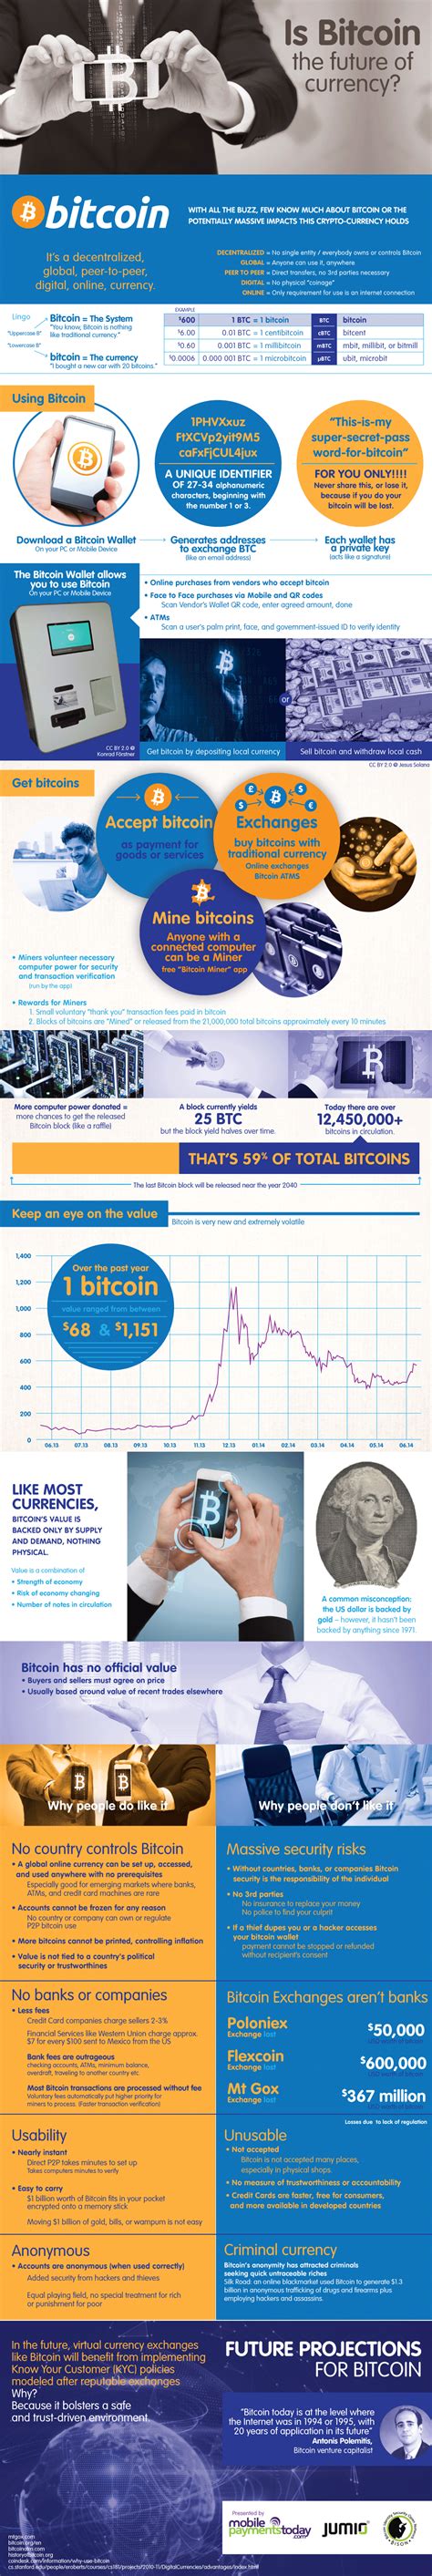 Bitcoin's 2020 performance has reminded many market watchers of its frenzied rally to nearly $20,000 in 2017, which was followed by a sharp pullback the following year. Is Bitcoin the Future of Currency? #infographic - Visualistan